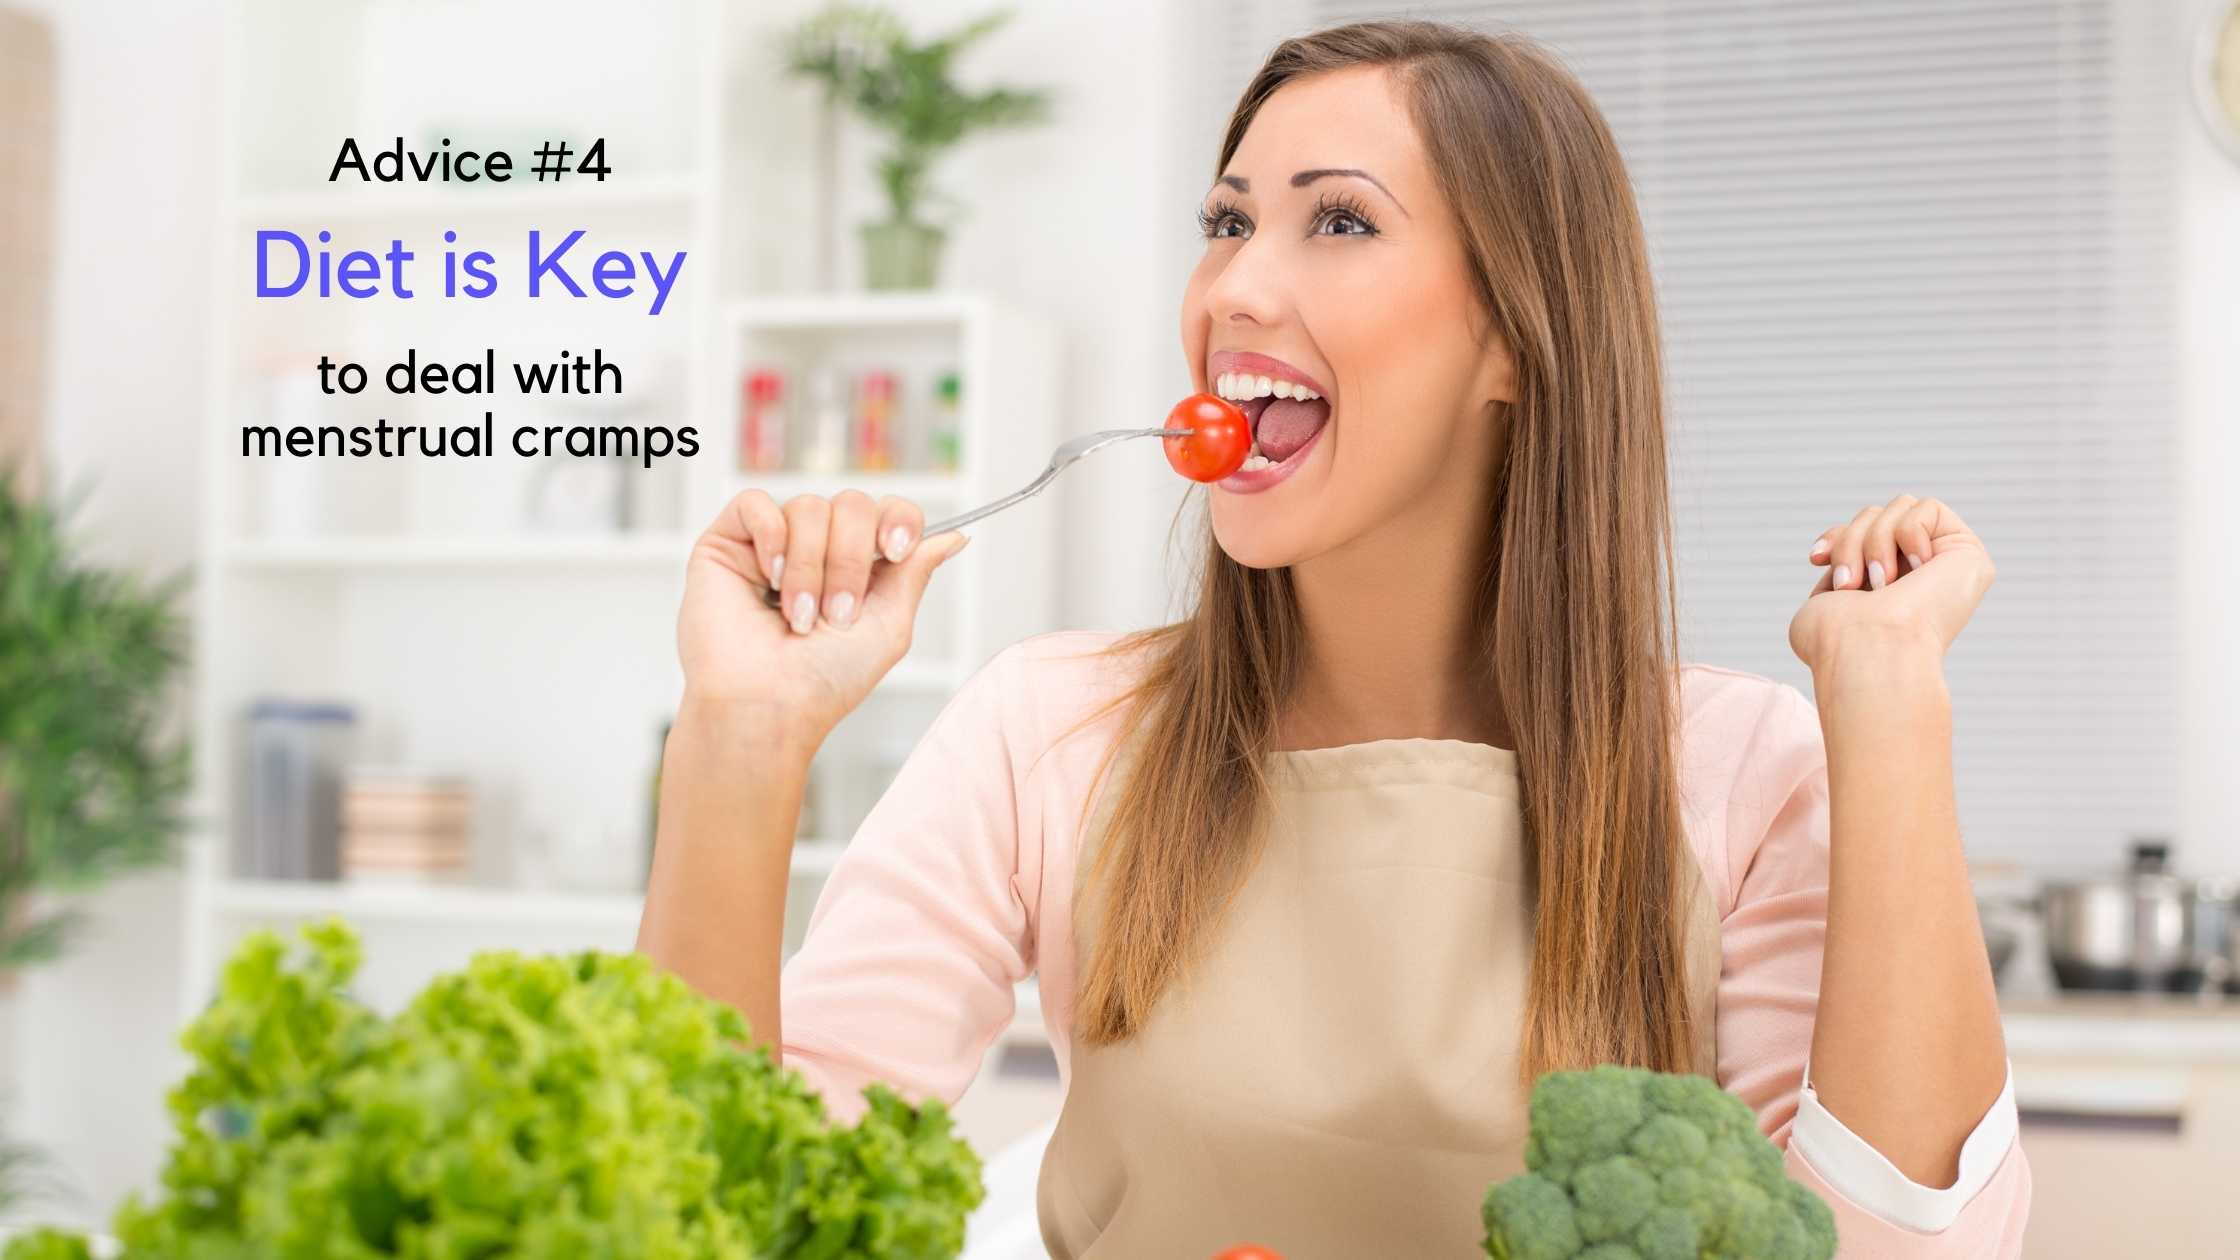 Diet is key to deal with menstrual cramps